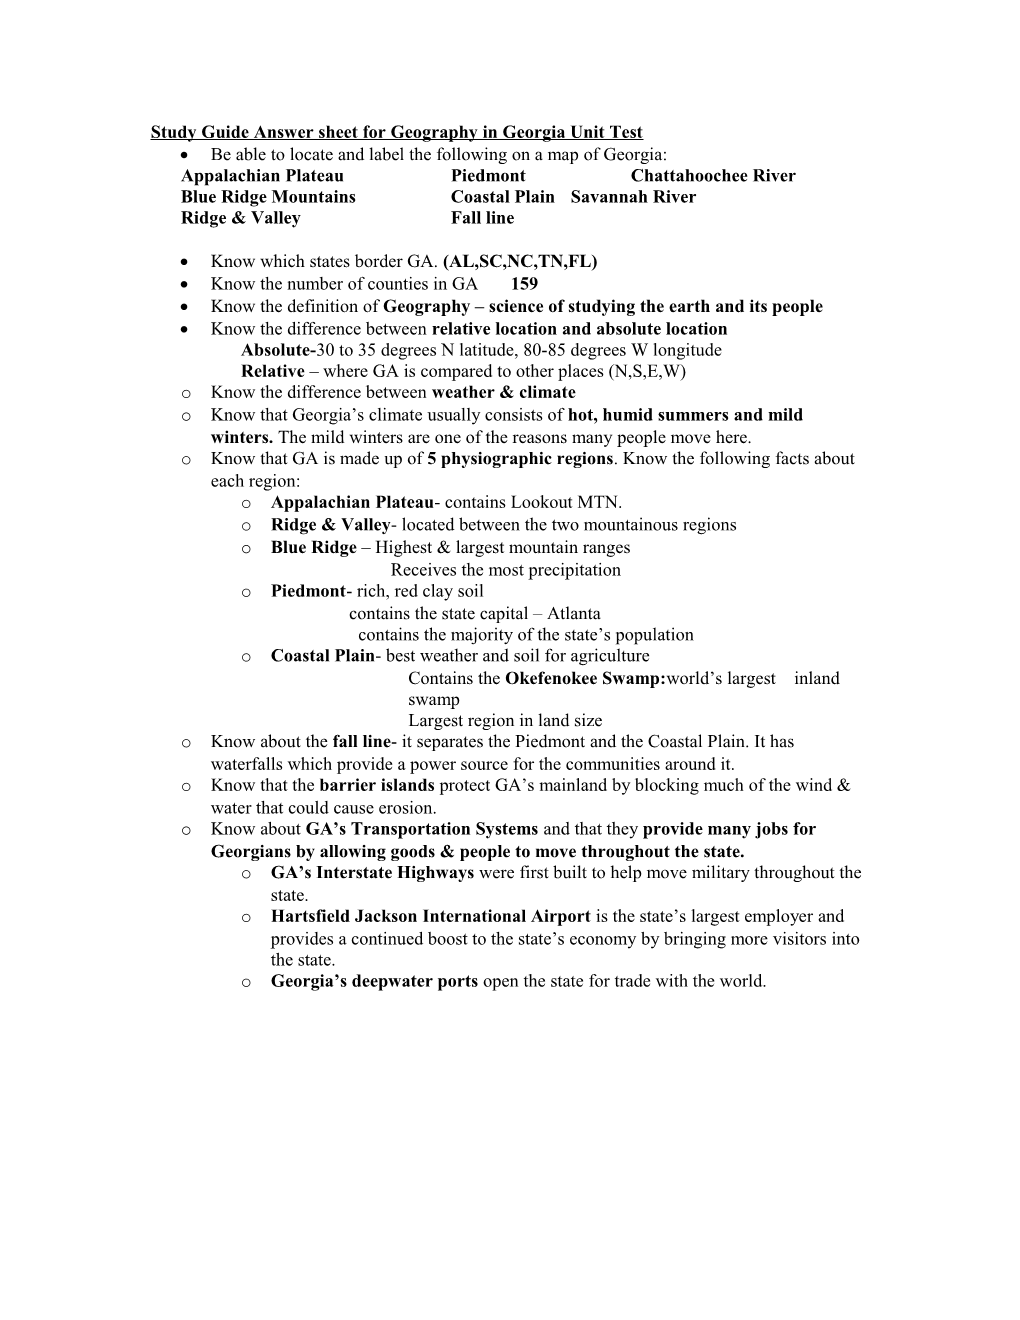 Study Guide Answer Sheet for Geography in Georgia Unit Test